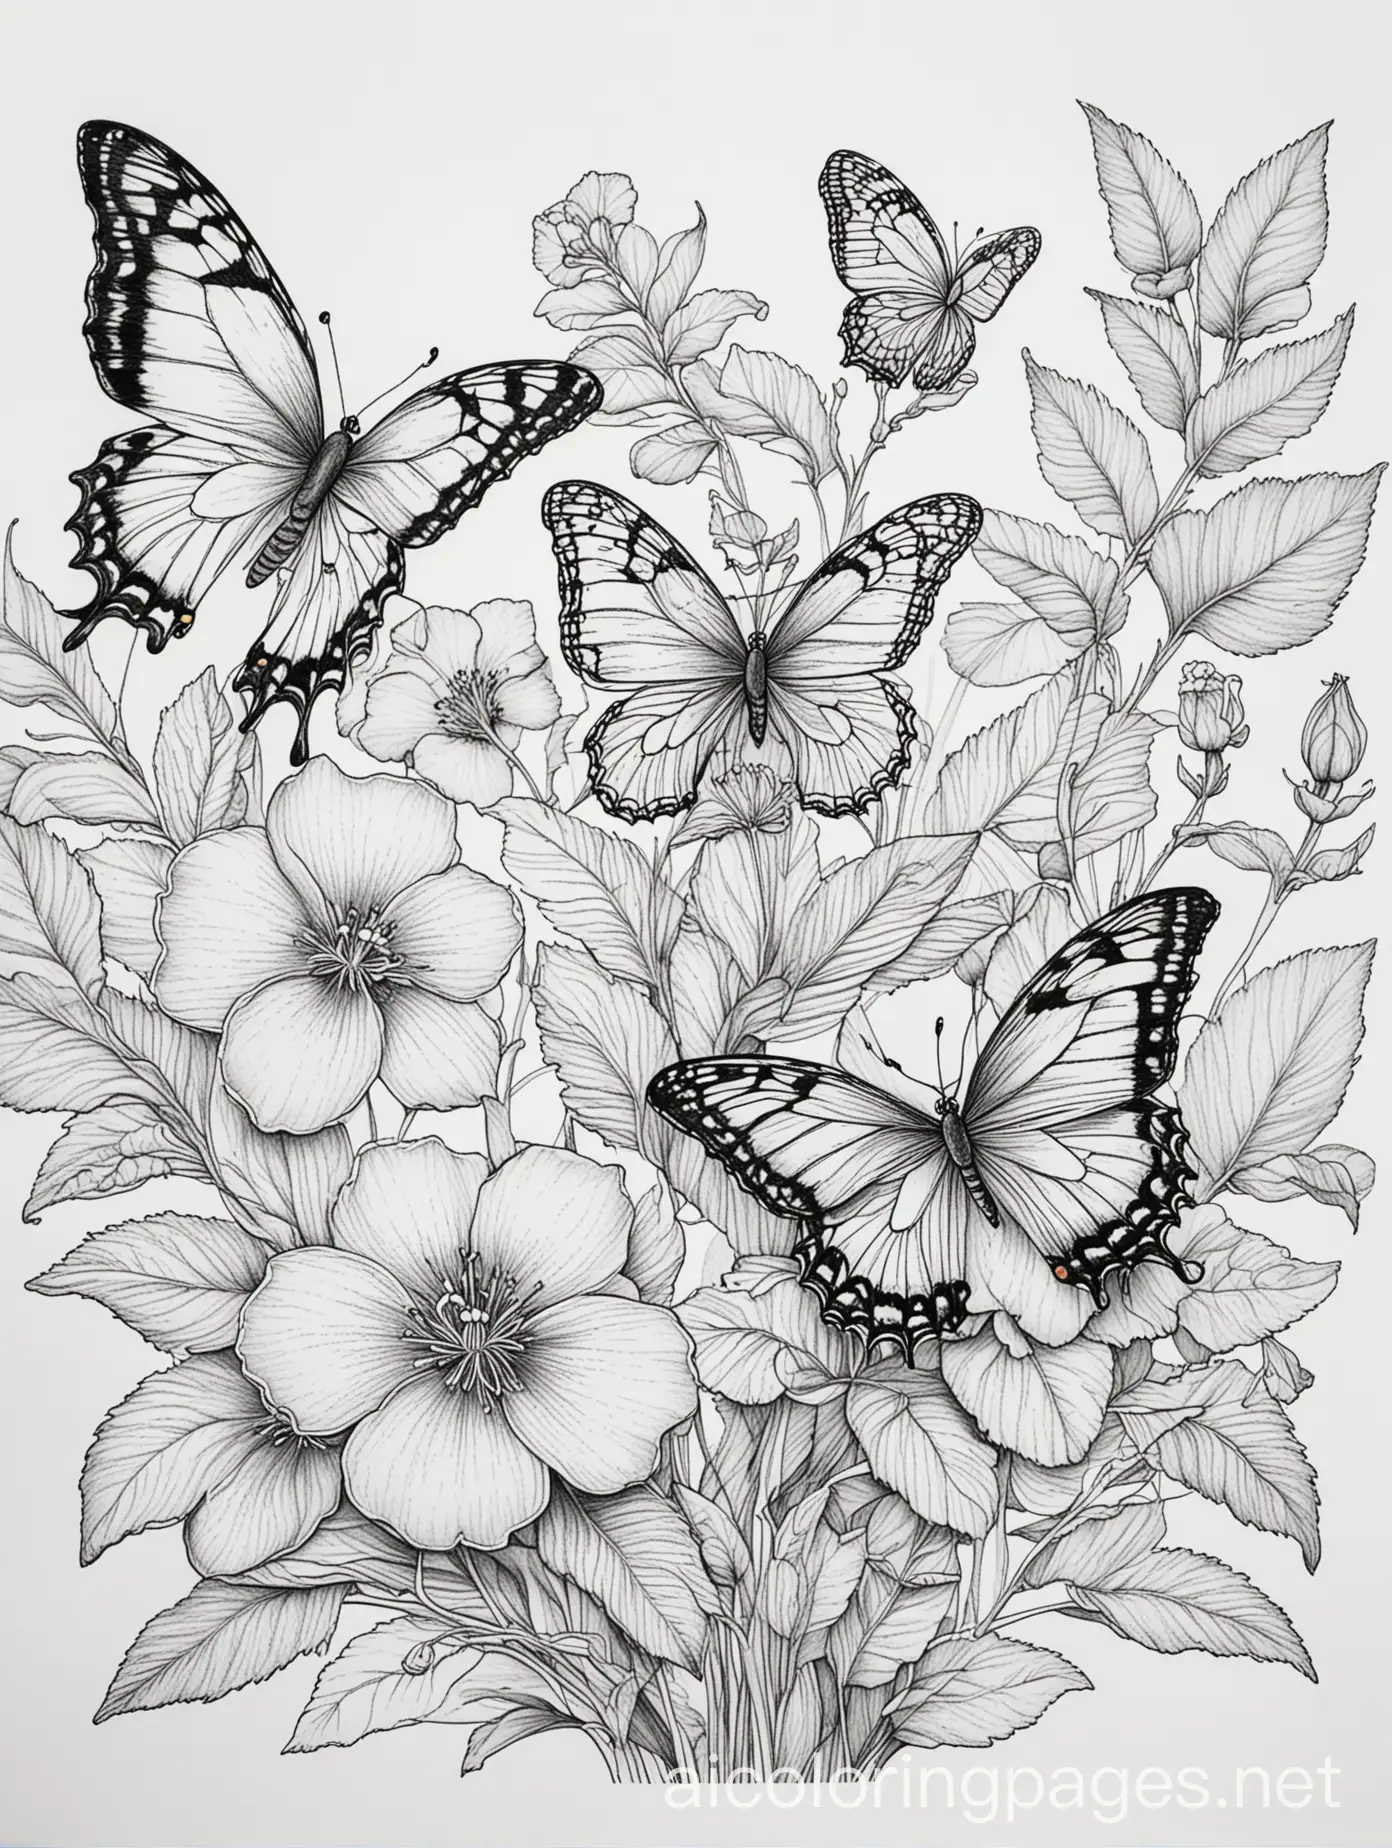 Violets-and-Butterflies-Coloring-Page-Black-and-White-Line-Art-with-Simplicity-and-Ample-White-Space